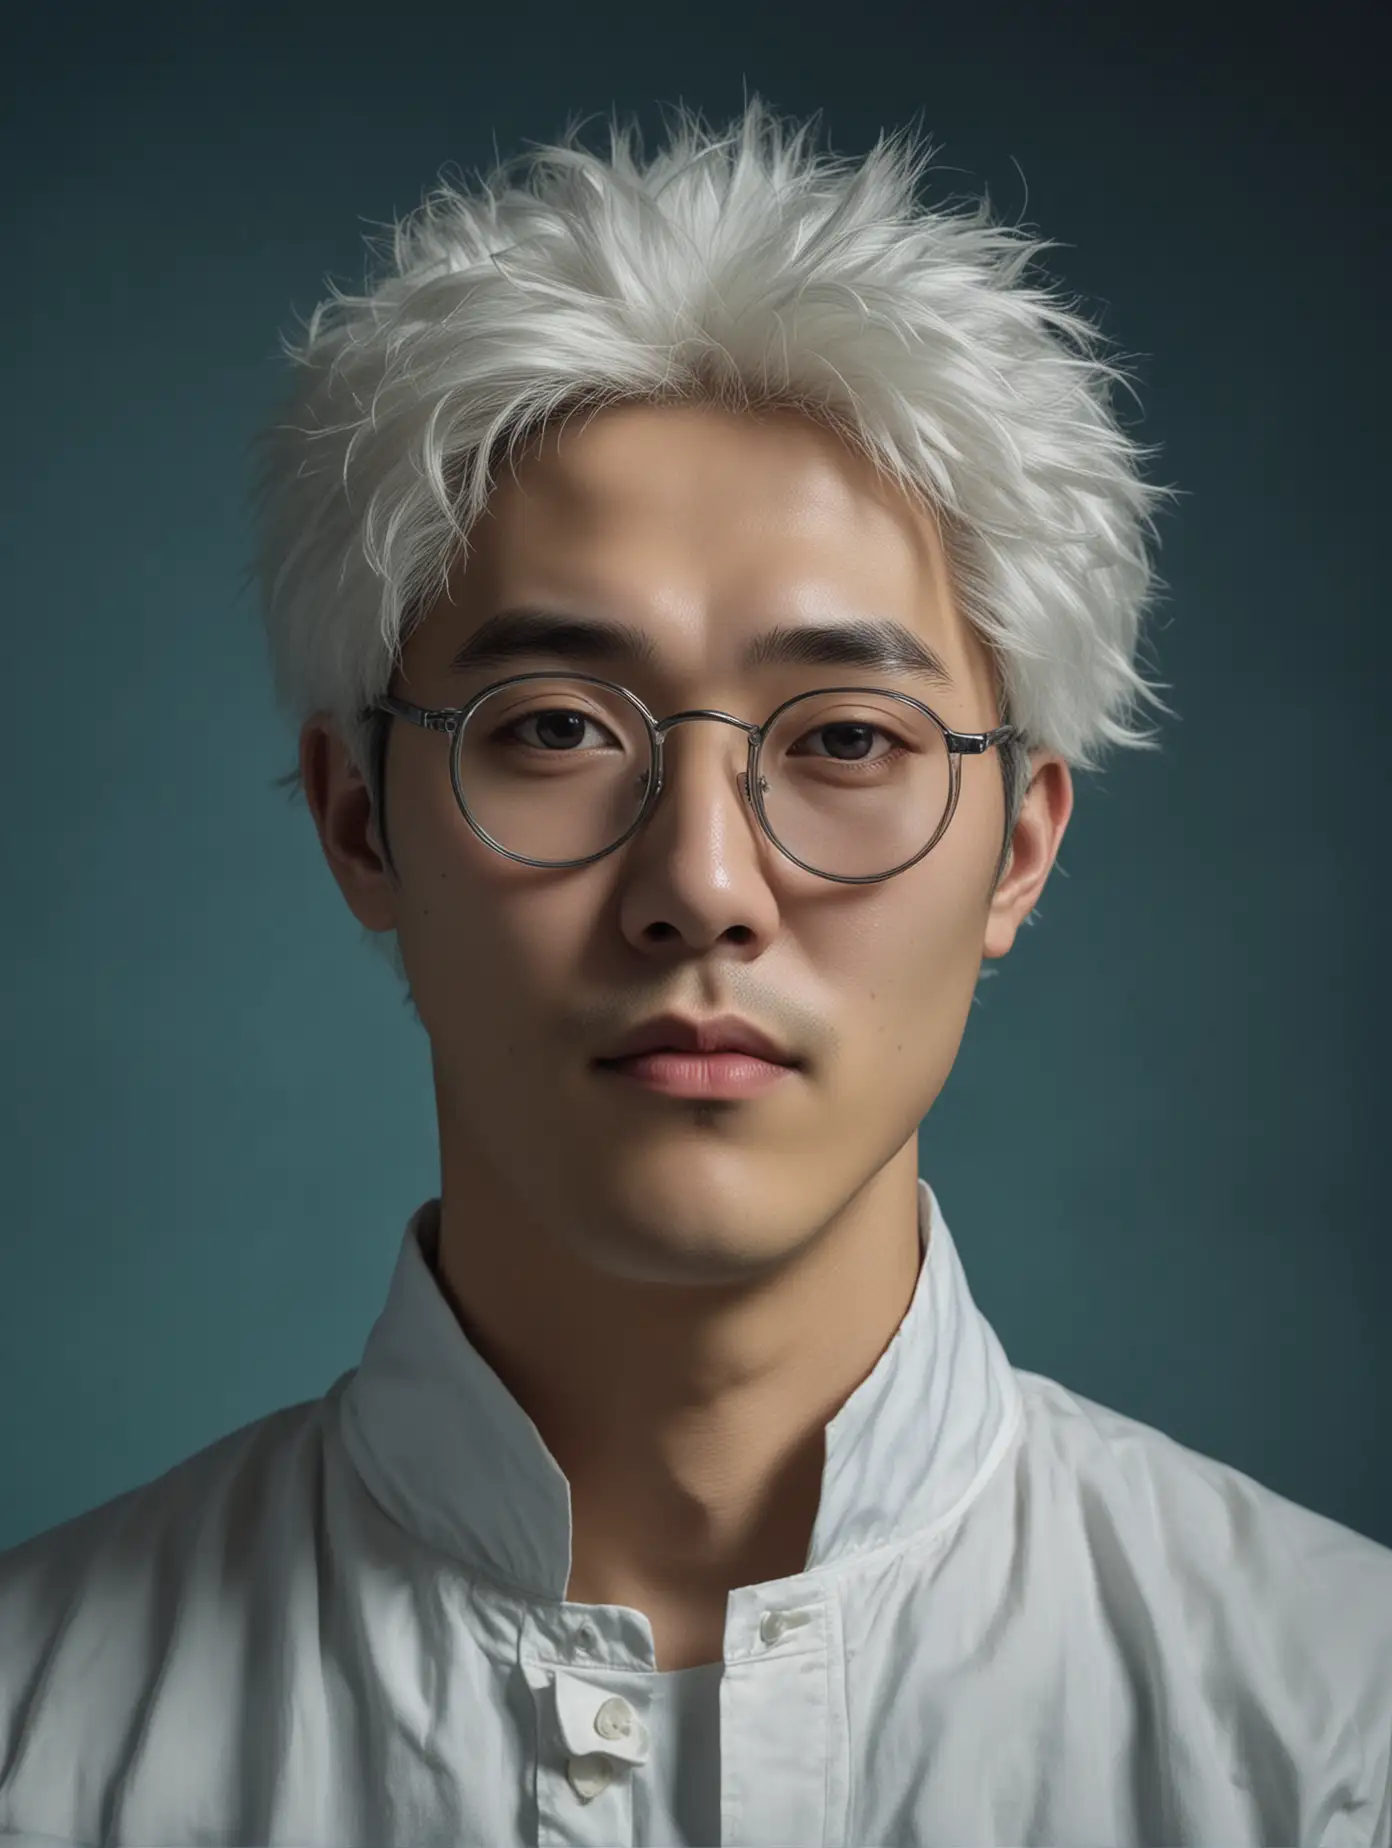 Young-Korean-Man-with-White-Hair-in-Rembrandt-Style-Portrait